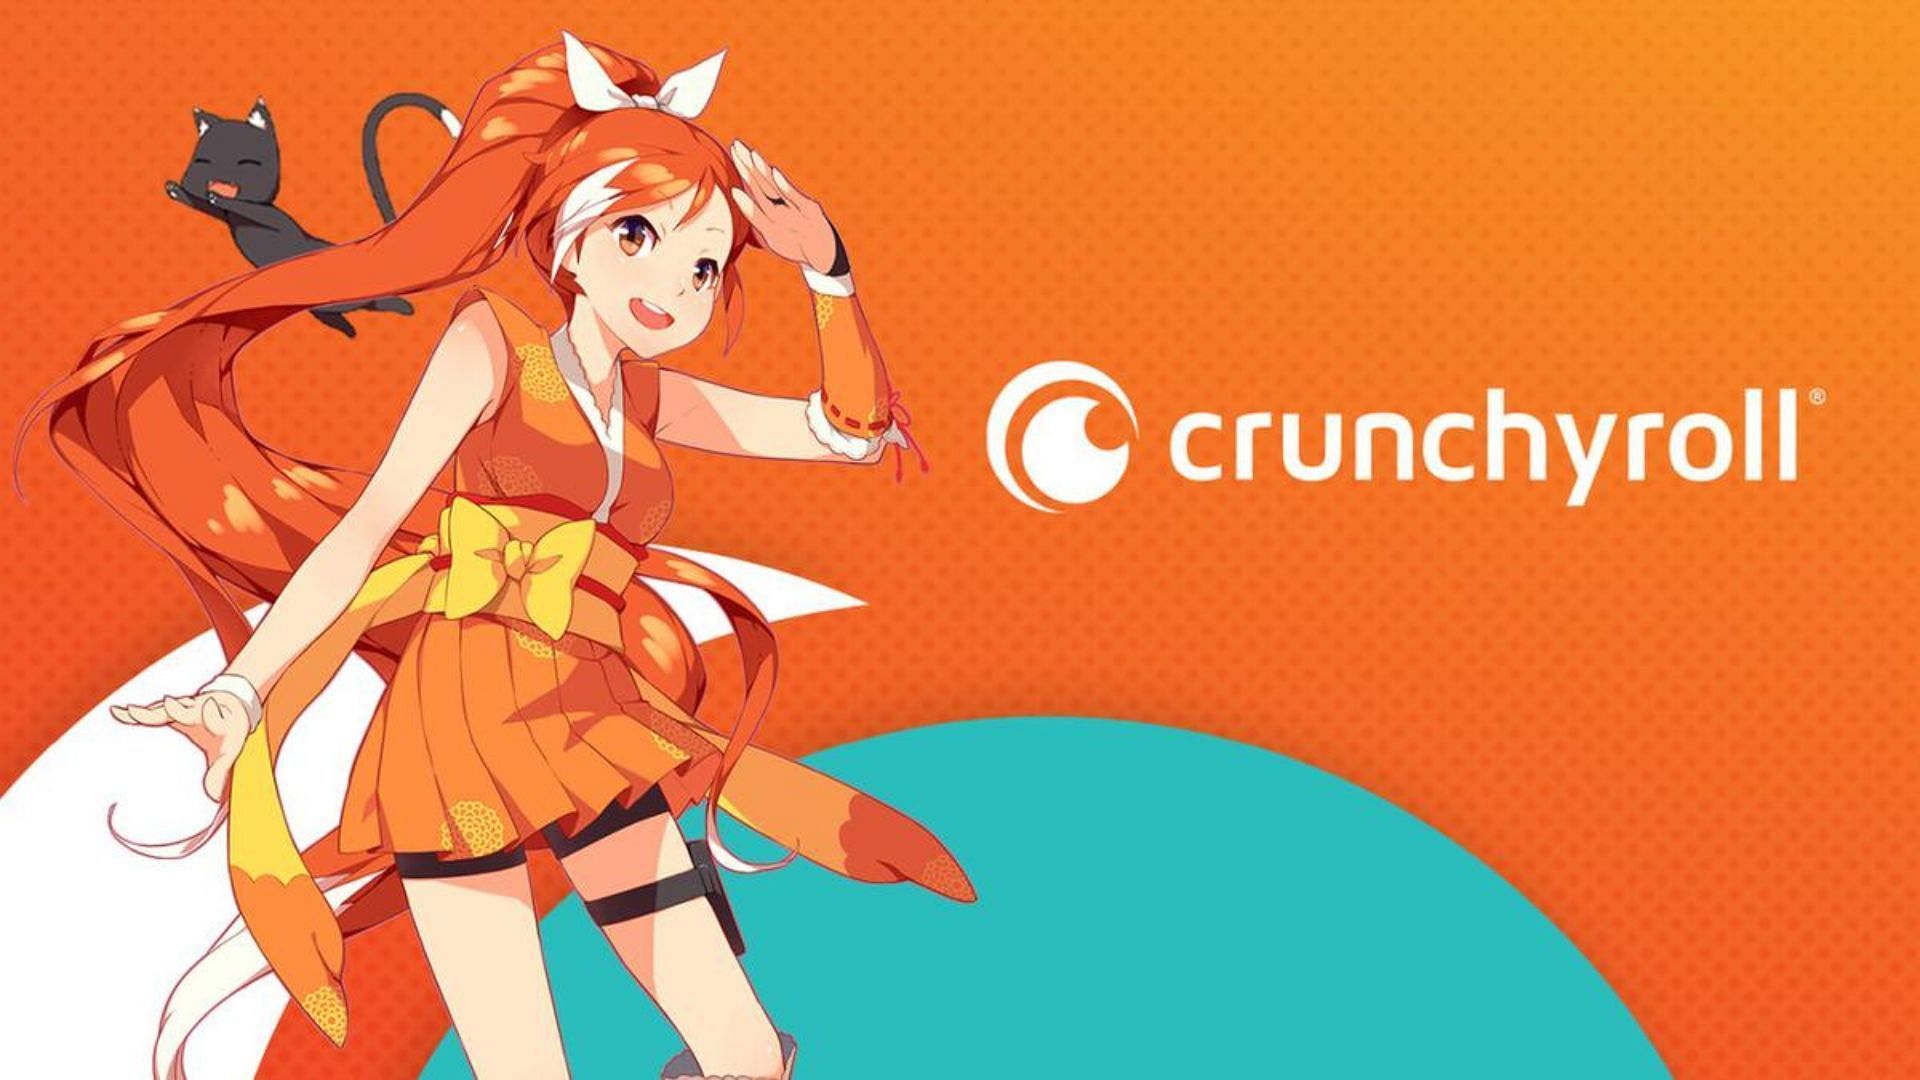 Why are anime fans so upset with Crunchyroll? Company